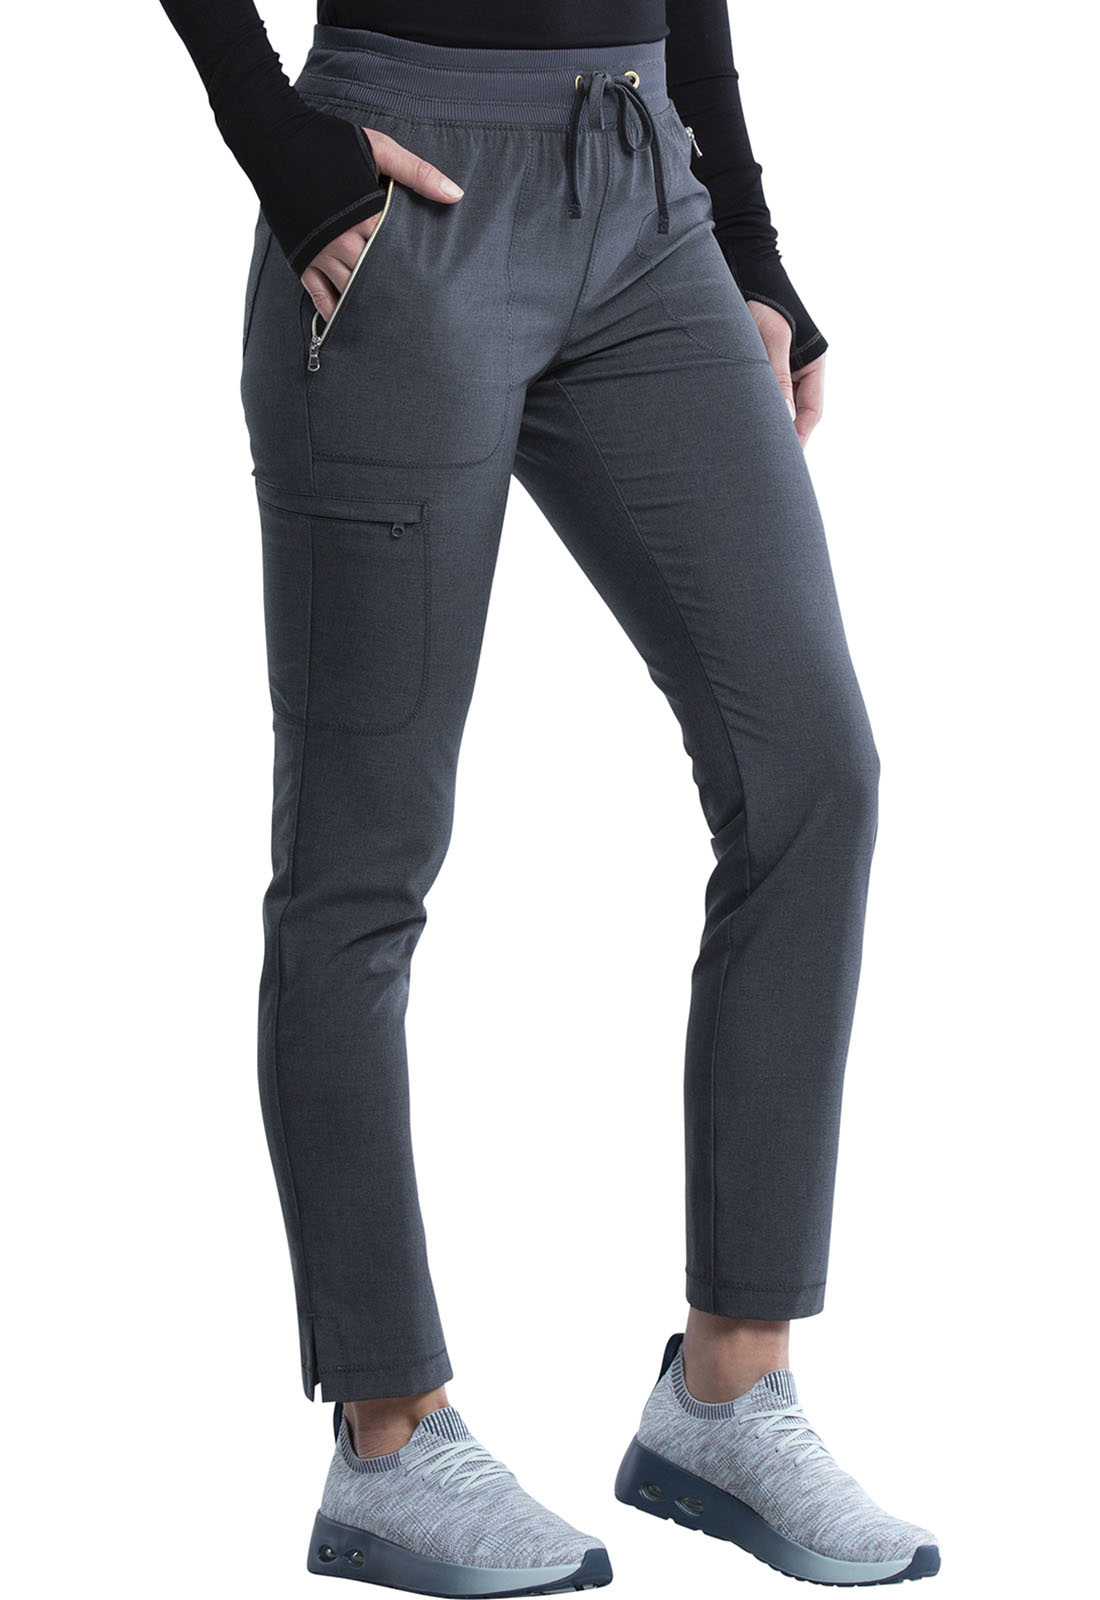 CHEROKEE Pull-on Pants Heather Charcoal CK135A